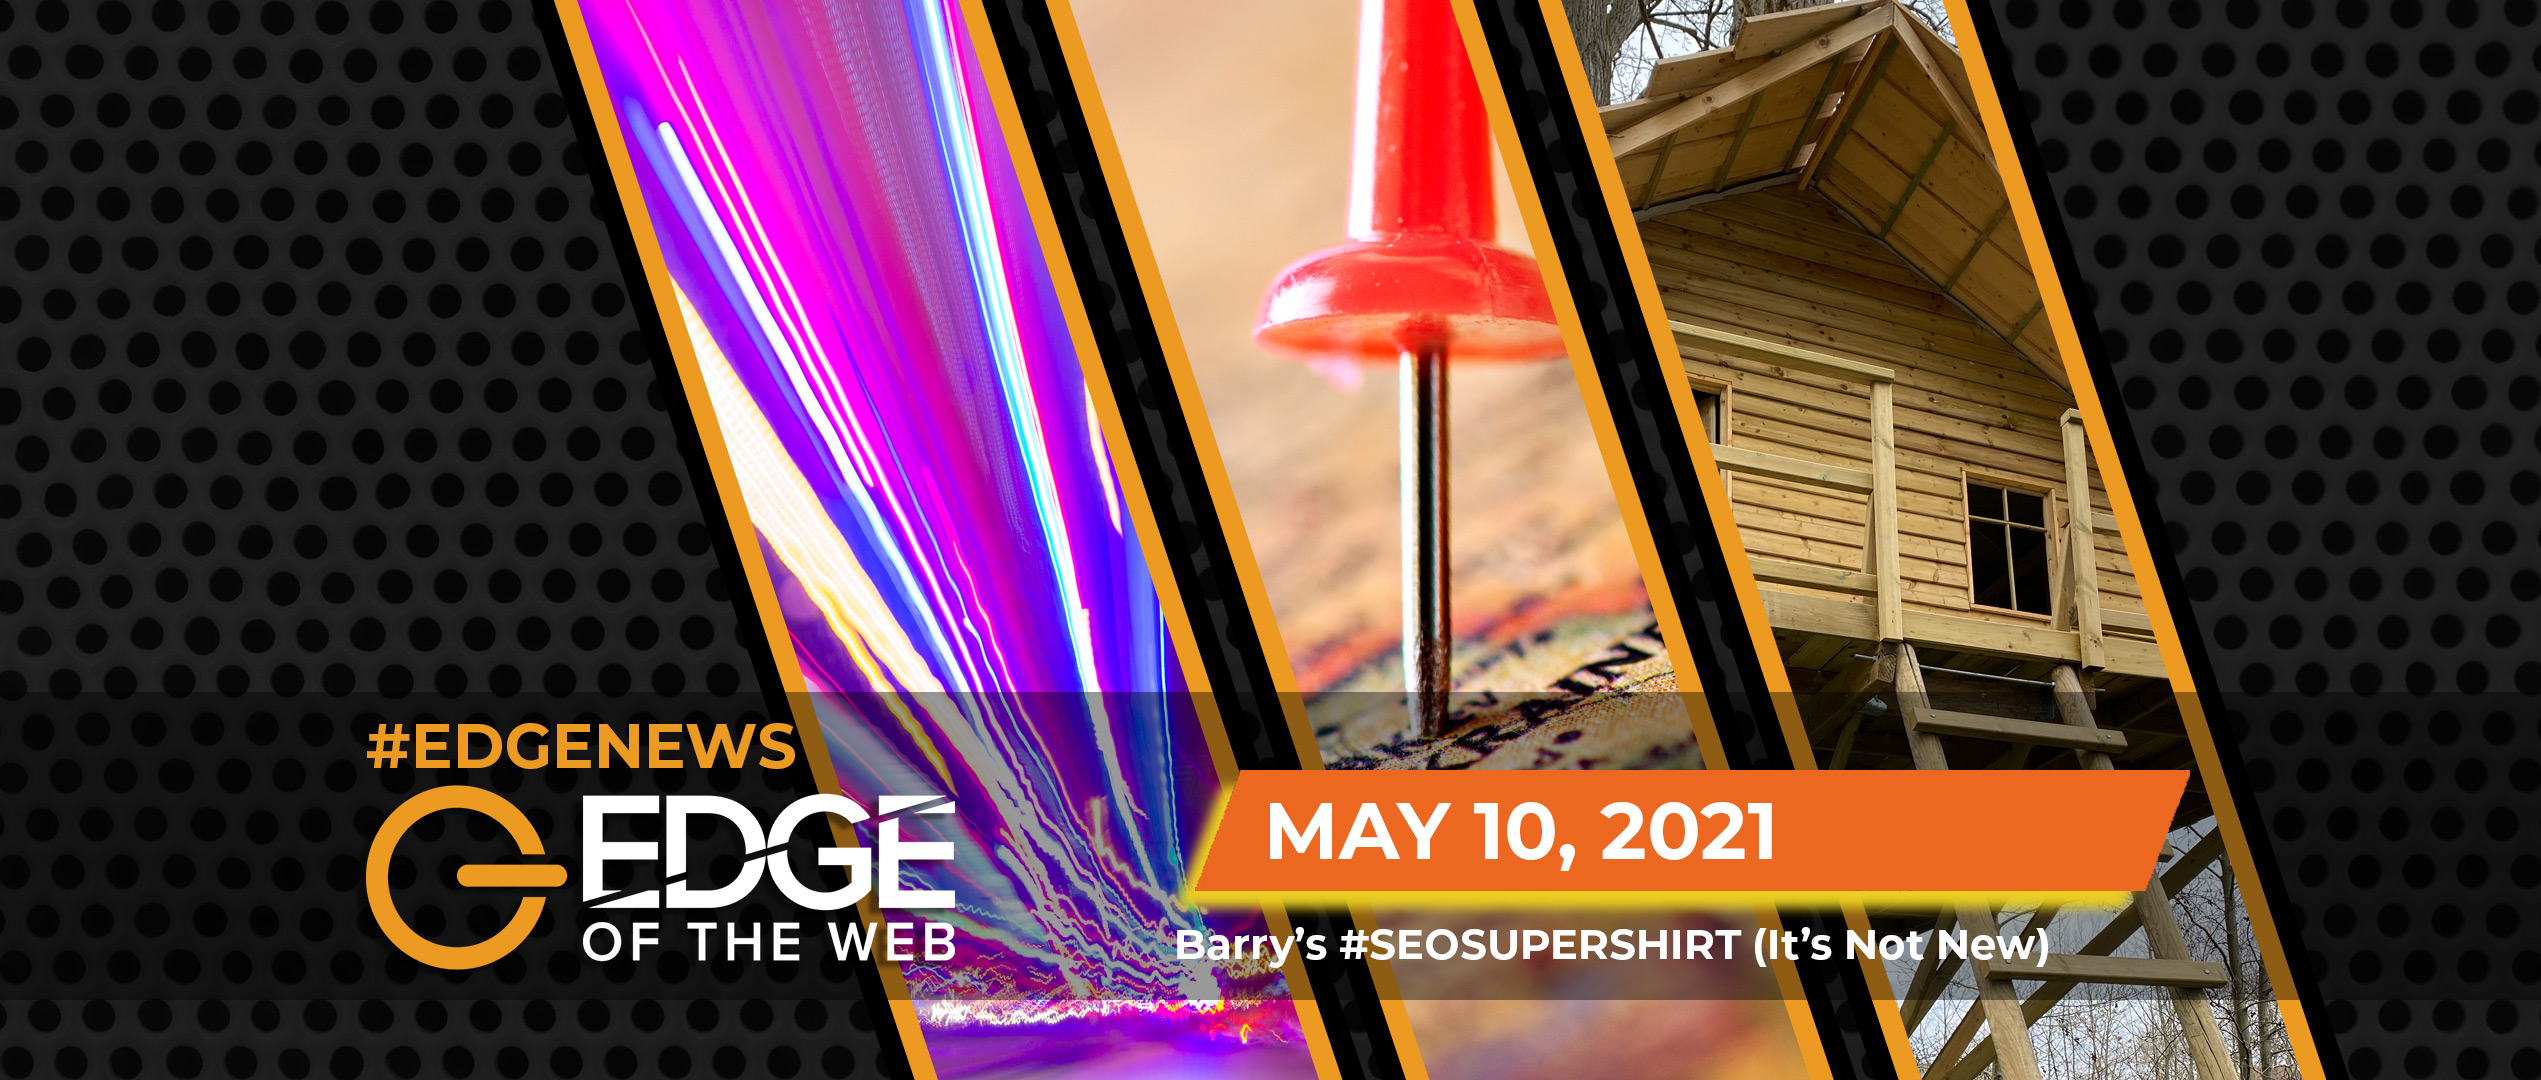 EDGE of the Web News title card for May 10, 2021